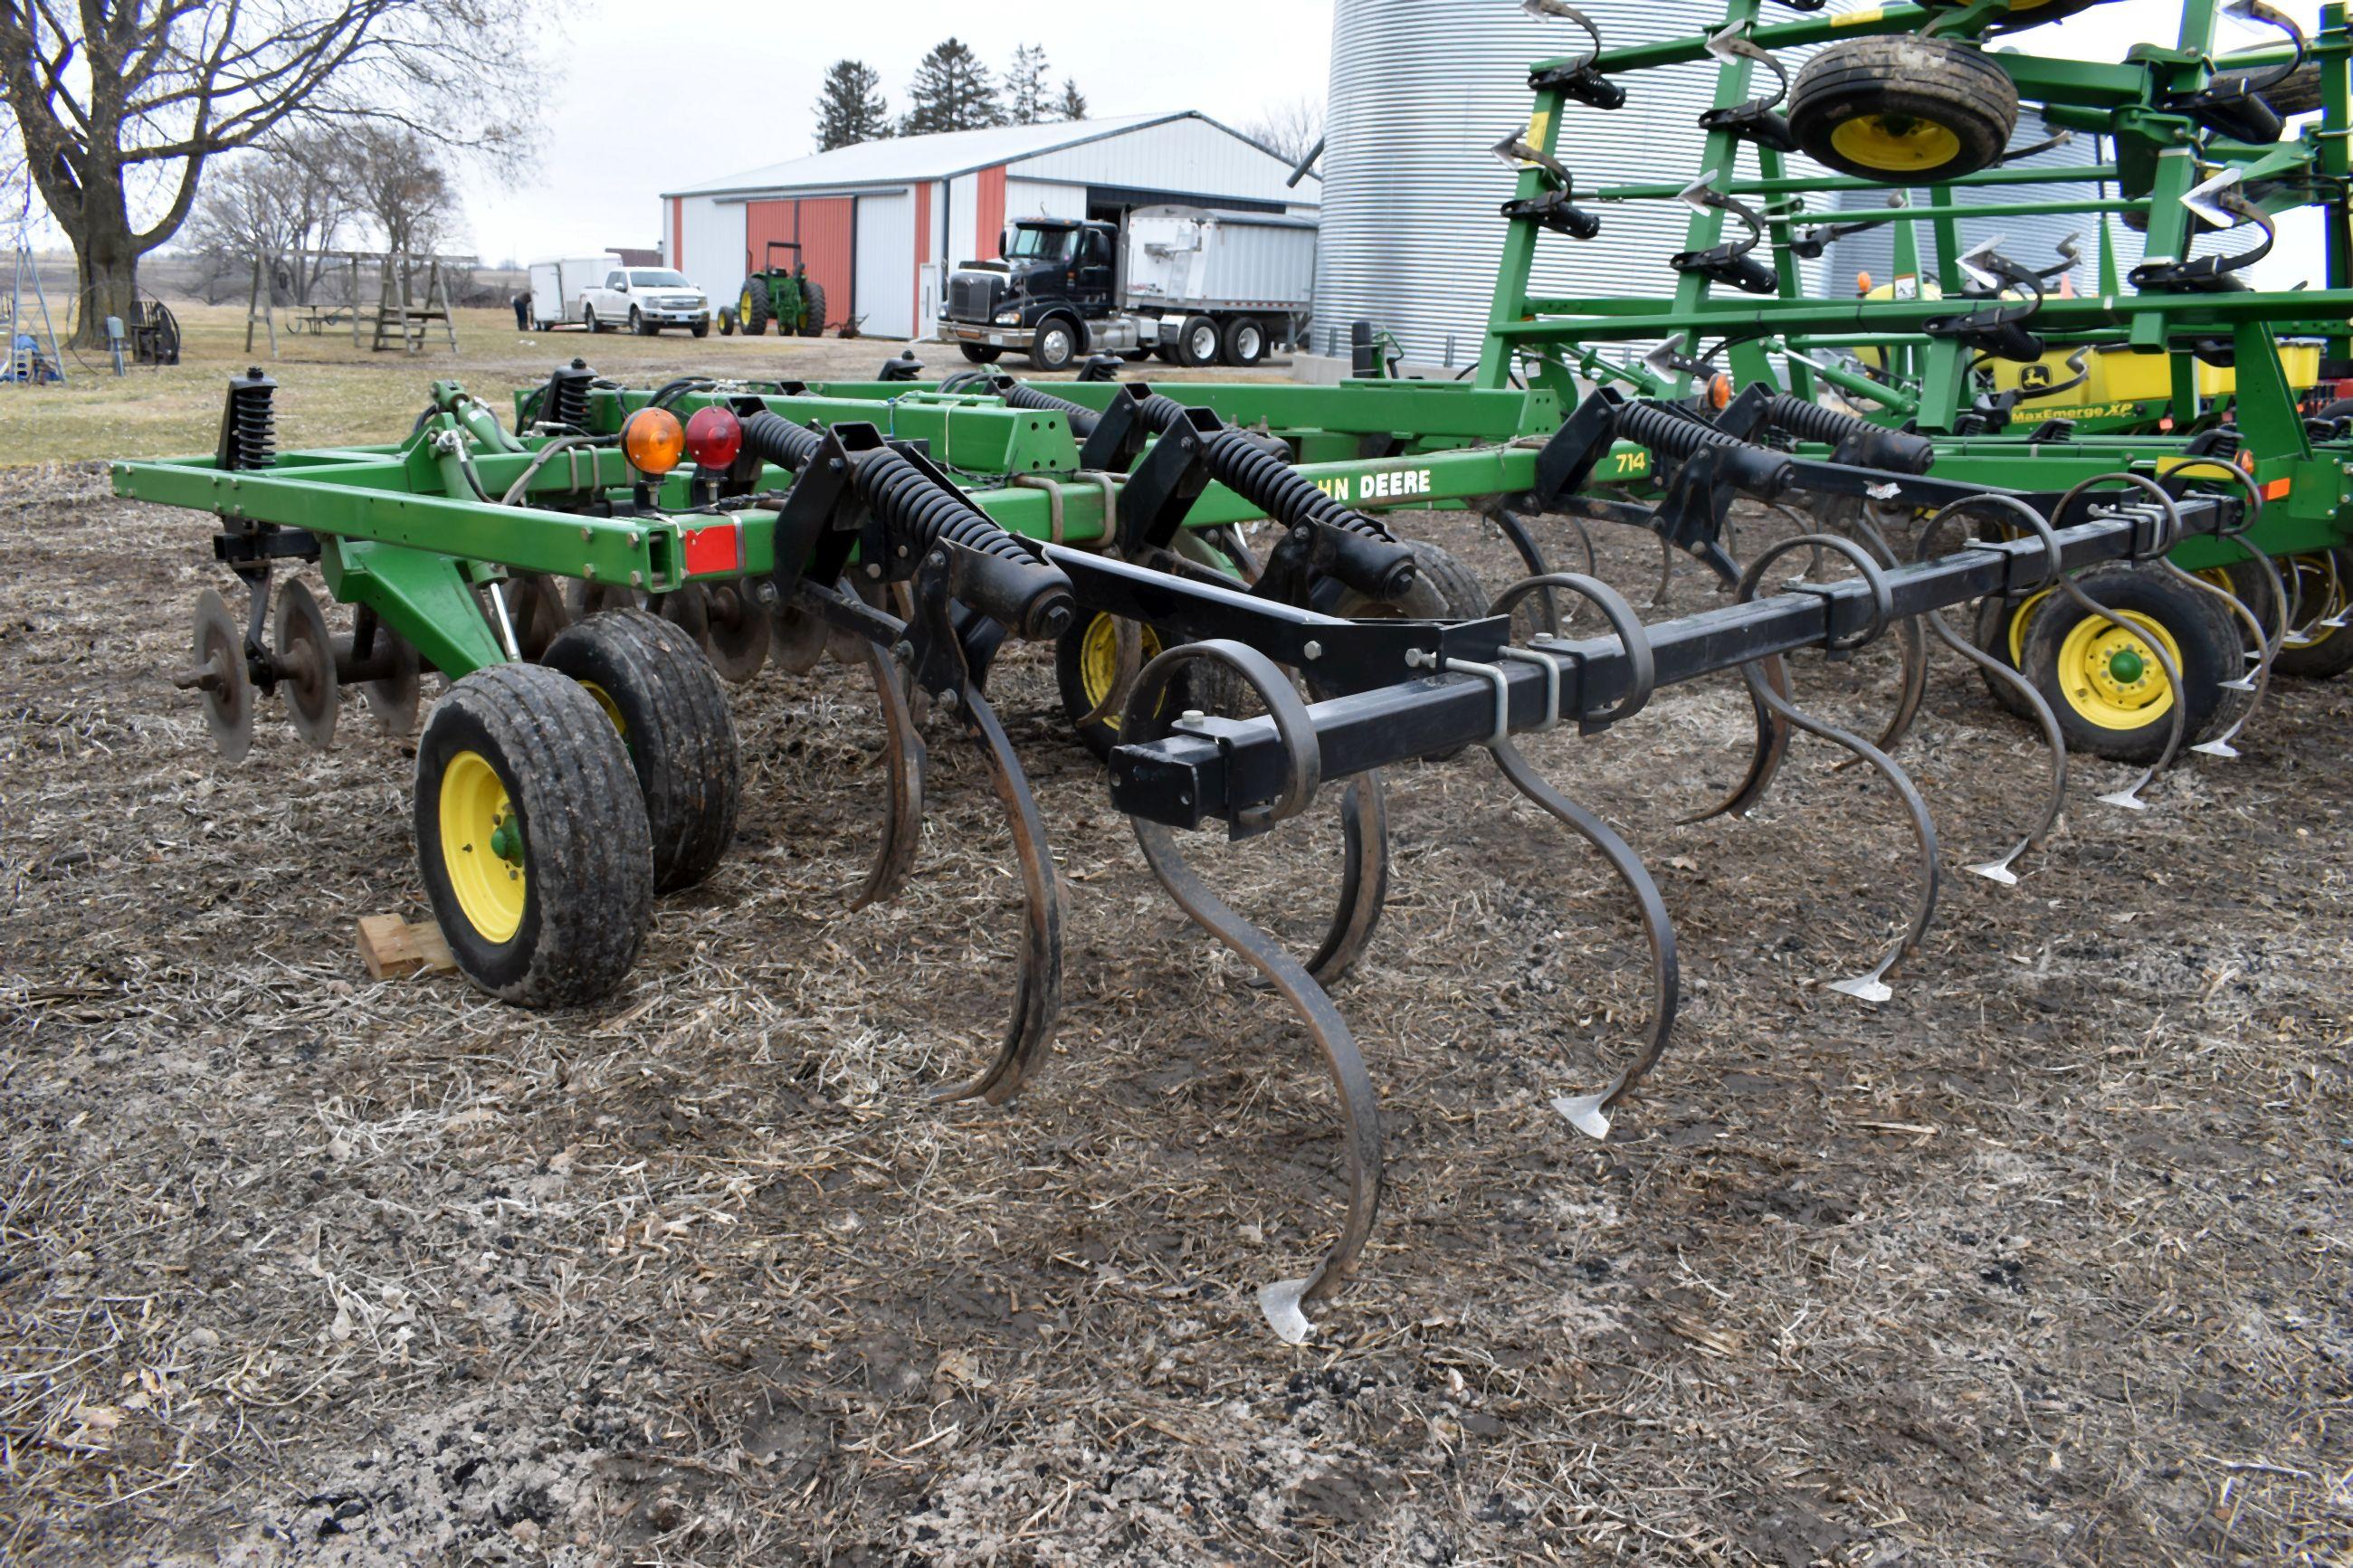 John Deere 714 Disc Chisel, 9 Shank, Hyd Single Disc Front, Rear Levelers, Like New, Good Condition,